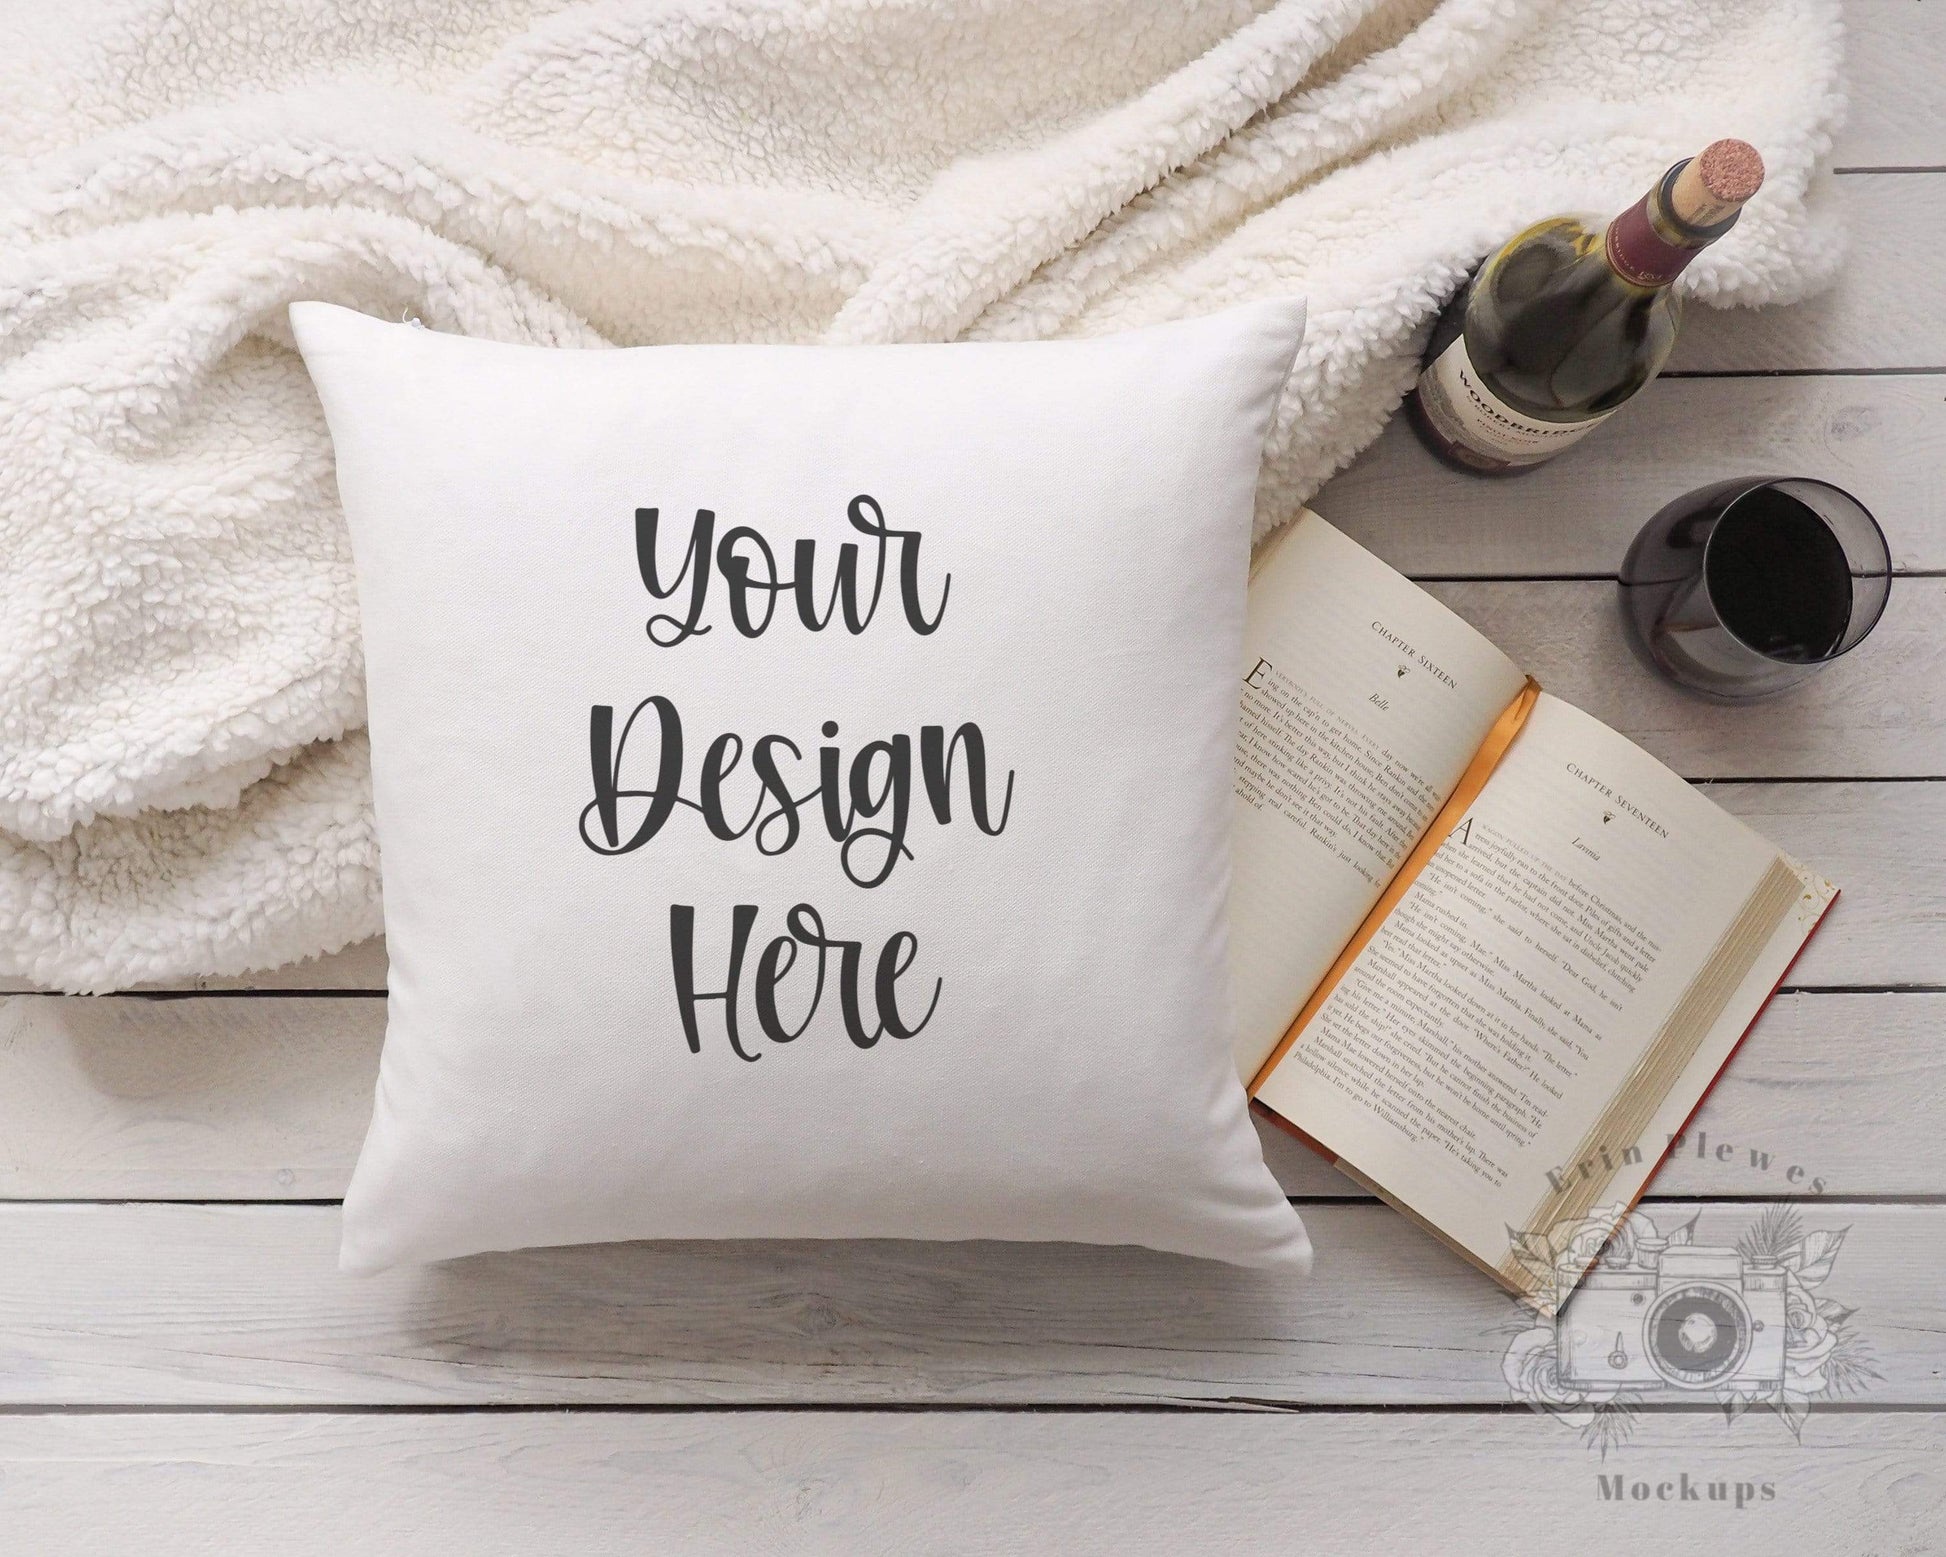 Erin Plewes Mockups Pillow Mockup, Square pillow mockup with blanket wine and book for lifestyle stock photography, White pillow mock up jpeg digital download